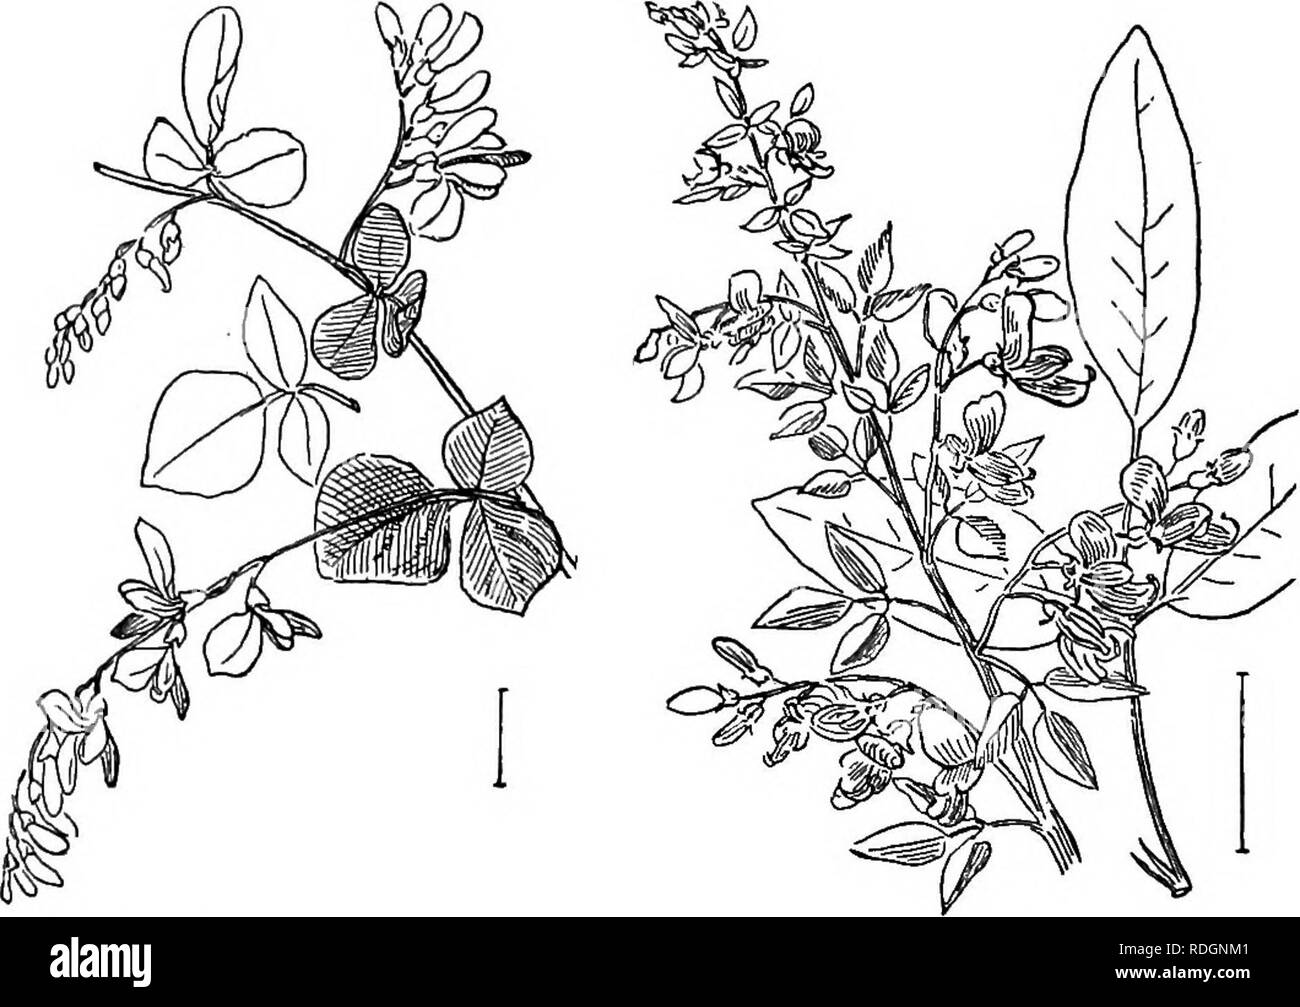 . Ornamental shrubs of the United States (hardy, cultivated). Shrubs. 124 DESCRIPTIONS OP THE SHRUBS KEY TO THE CULTIVATED COLUTEAS * Flowers lemon-yellow, | inch long, 3-8 In a cluster ; shrub to 15 feet; leaves with 9-13 dull green blades J-1 inch long. Tall Colutea (150) — Colutea arborfescens. * Flowers orange to brownish, 3-6 in a cluster. (A.) A. Pod closed at tip. Orange-flowered Colutea (151) —Colutea mfedia. A. Pod open at tip. Oriental Colutea — Colutea orientMis. LespedSza. The Lespedezas or Bush ' Clovers ' are mainly herba- ceous, but one species in cultivation is shrubby, and two Stock Photo